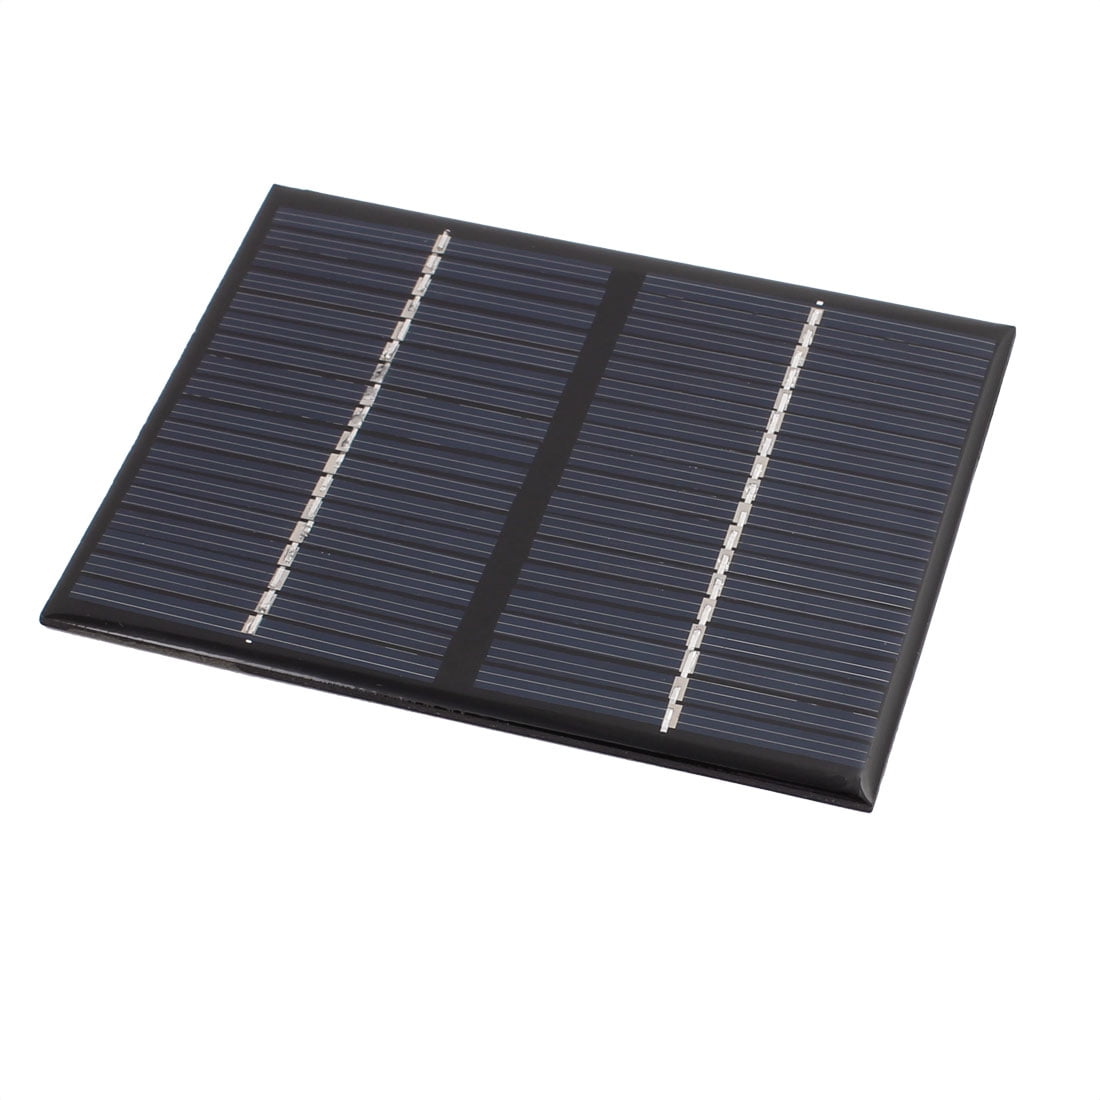 5Pcs 2.5V 60mA Poly Mini Round Solar Panel Module for Phone Toy Charger 55mm Dia 